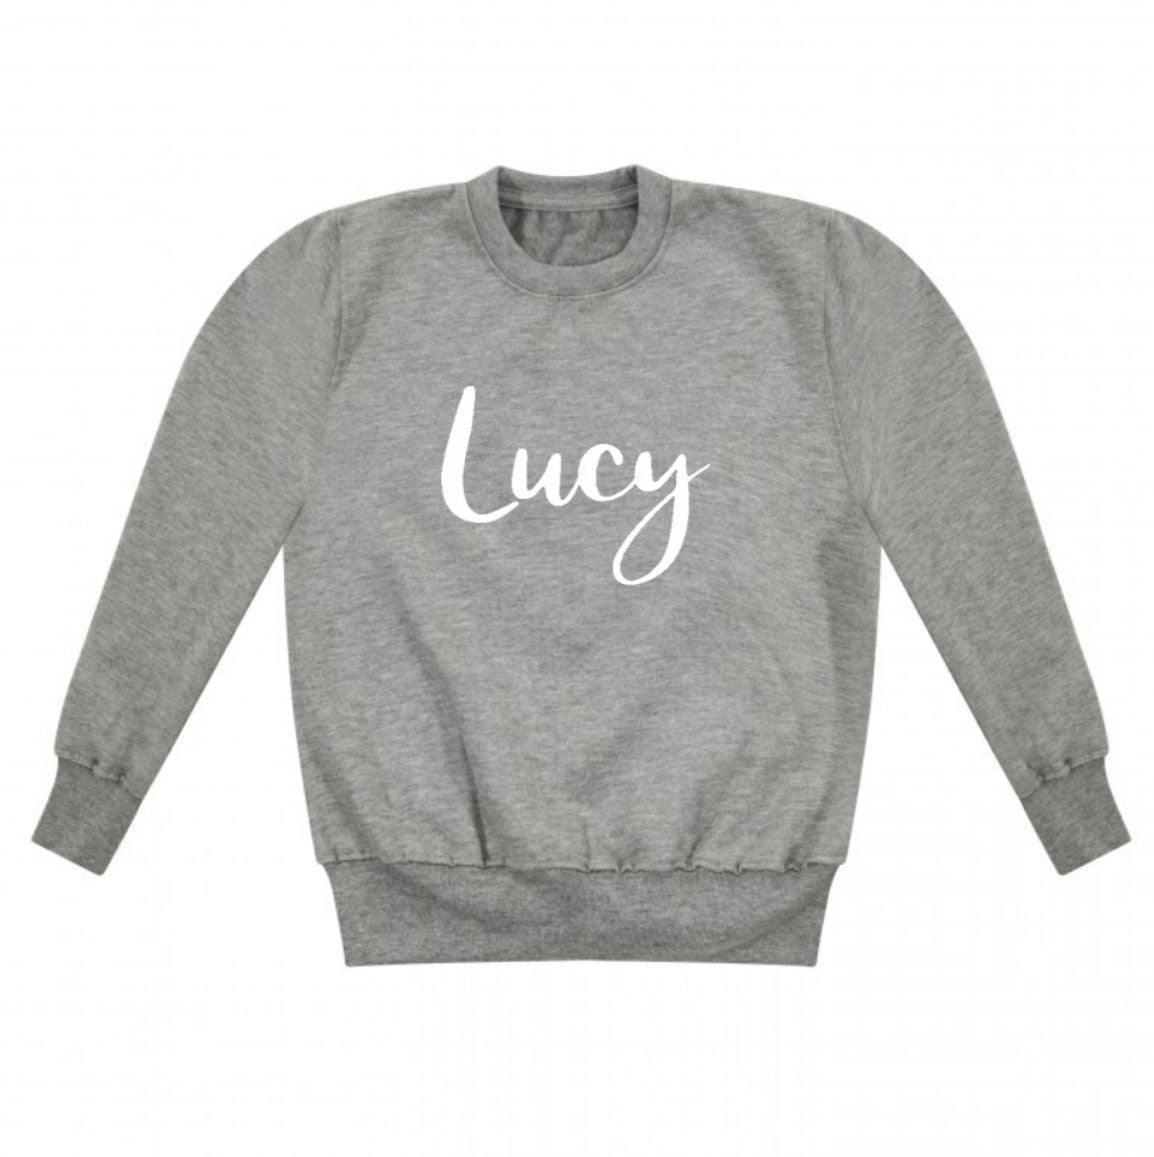 Create Your Own Grey Sweater